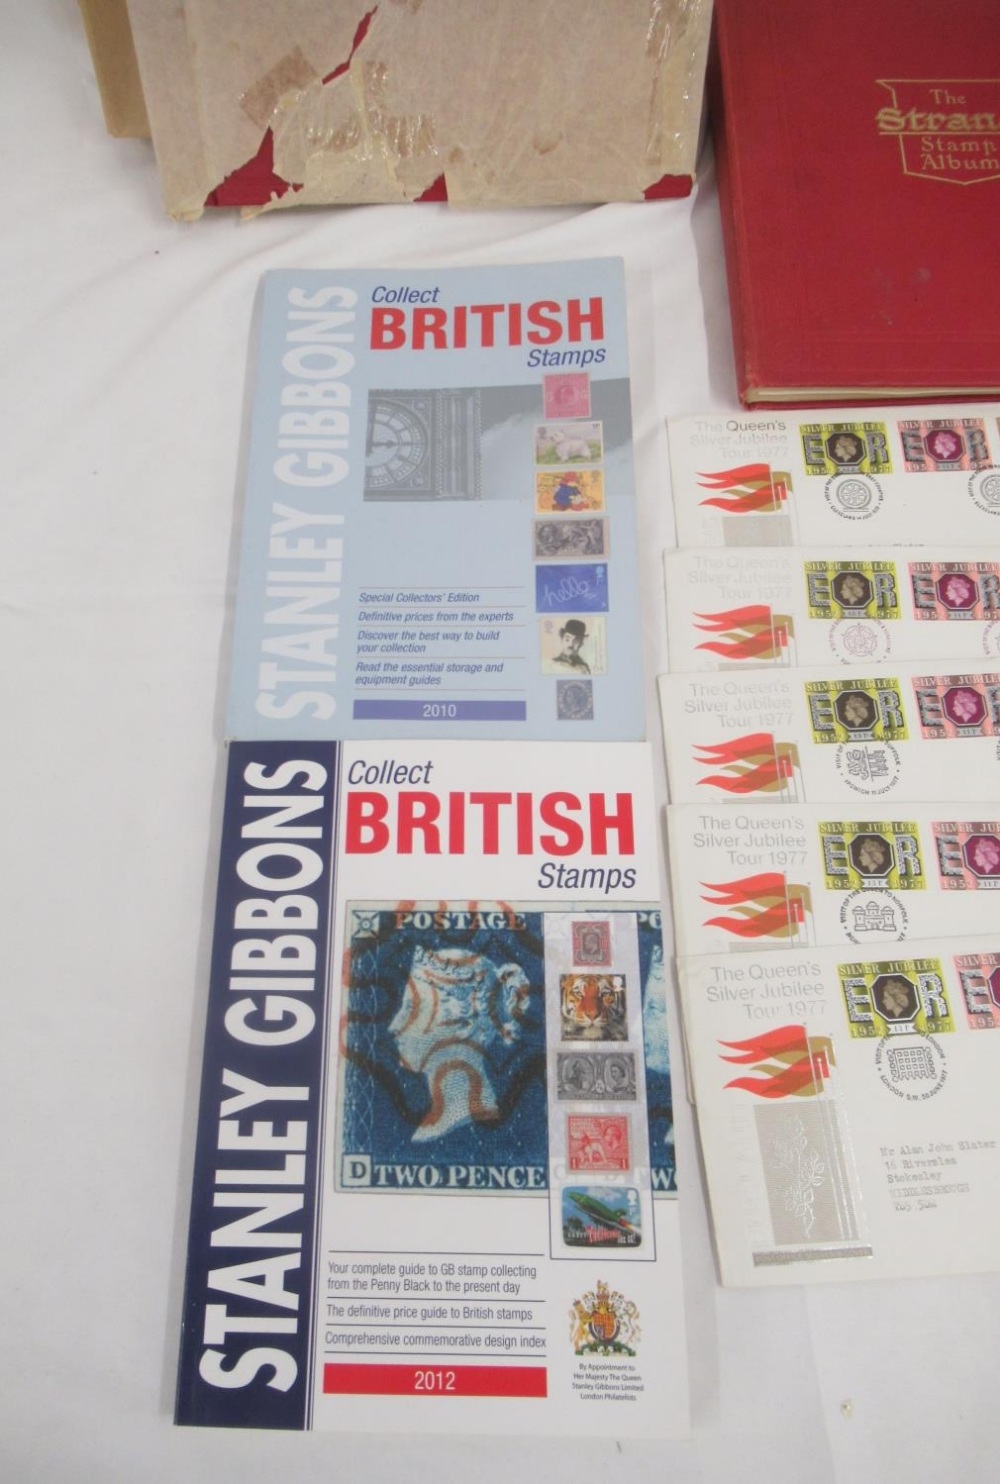 The Strand Stamp Album cont. 5 used penny reds, red and green folders cont. c20th British stamps, - Bild 4 aus 14